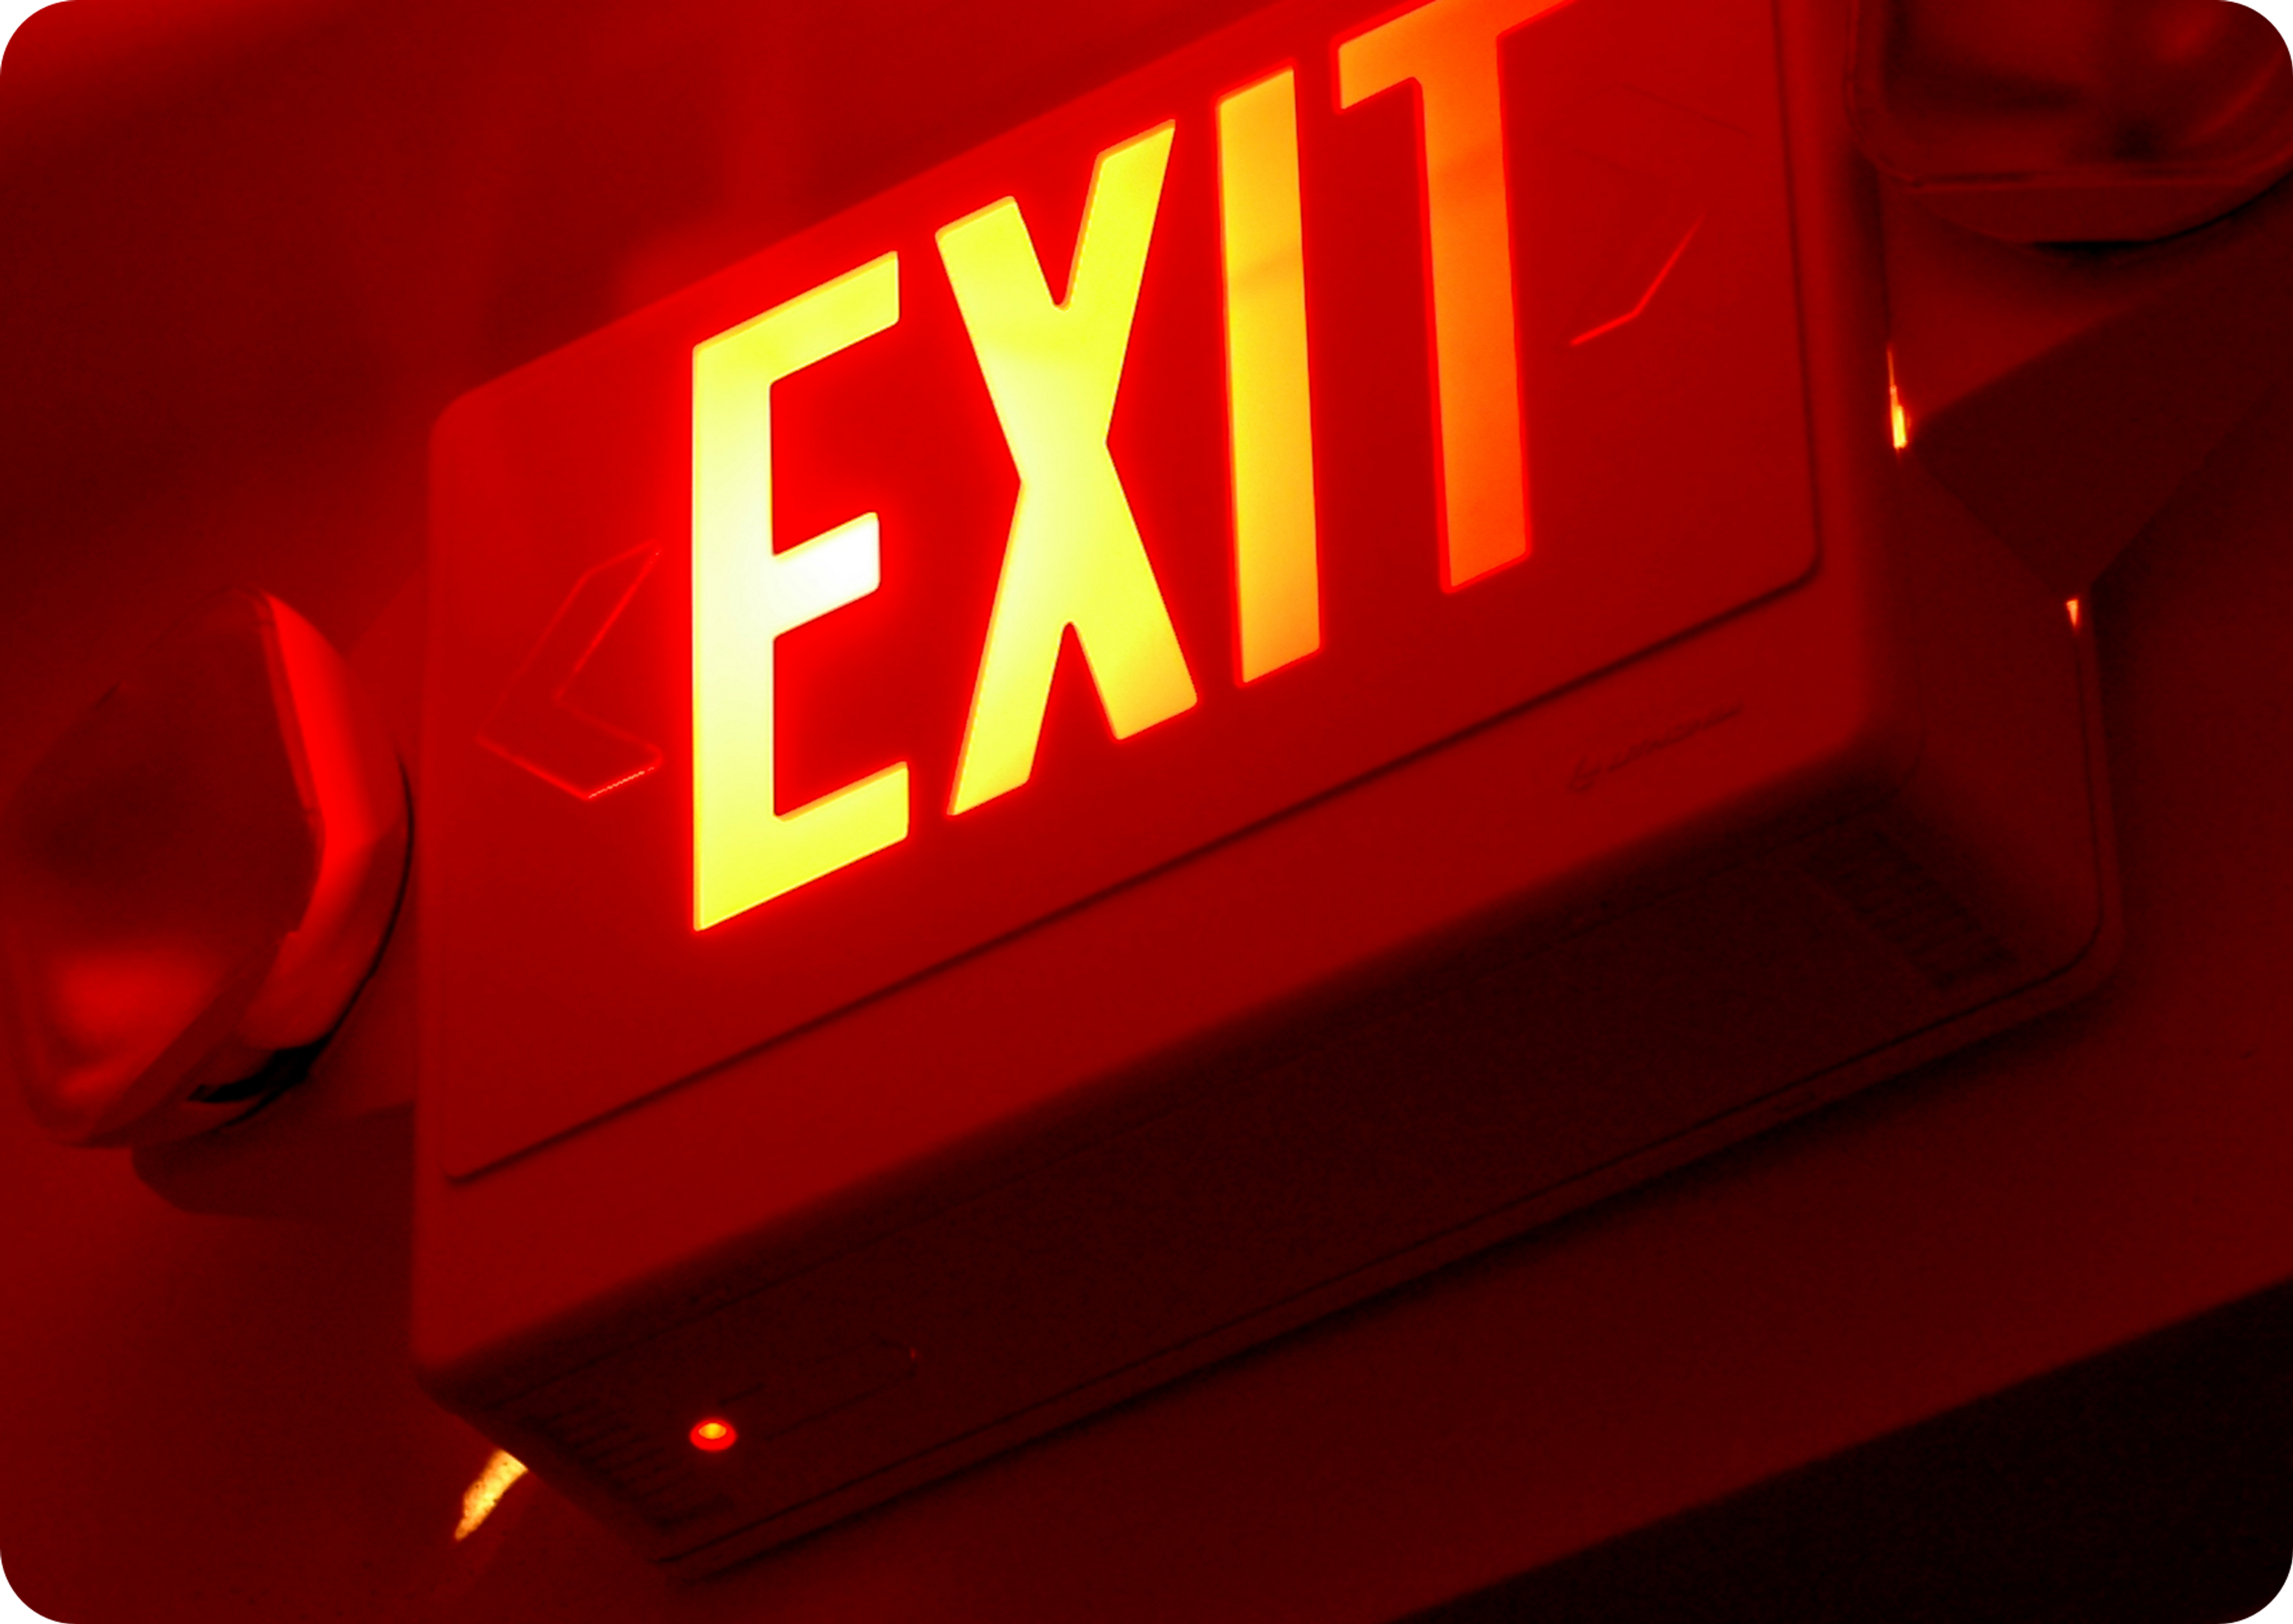 Picture of "EXIT" sign glowing red 